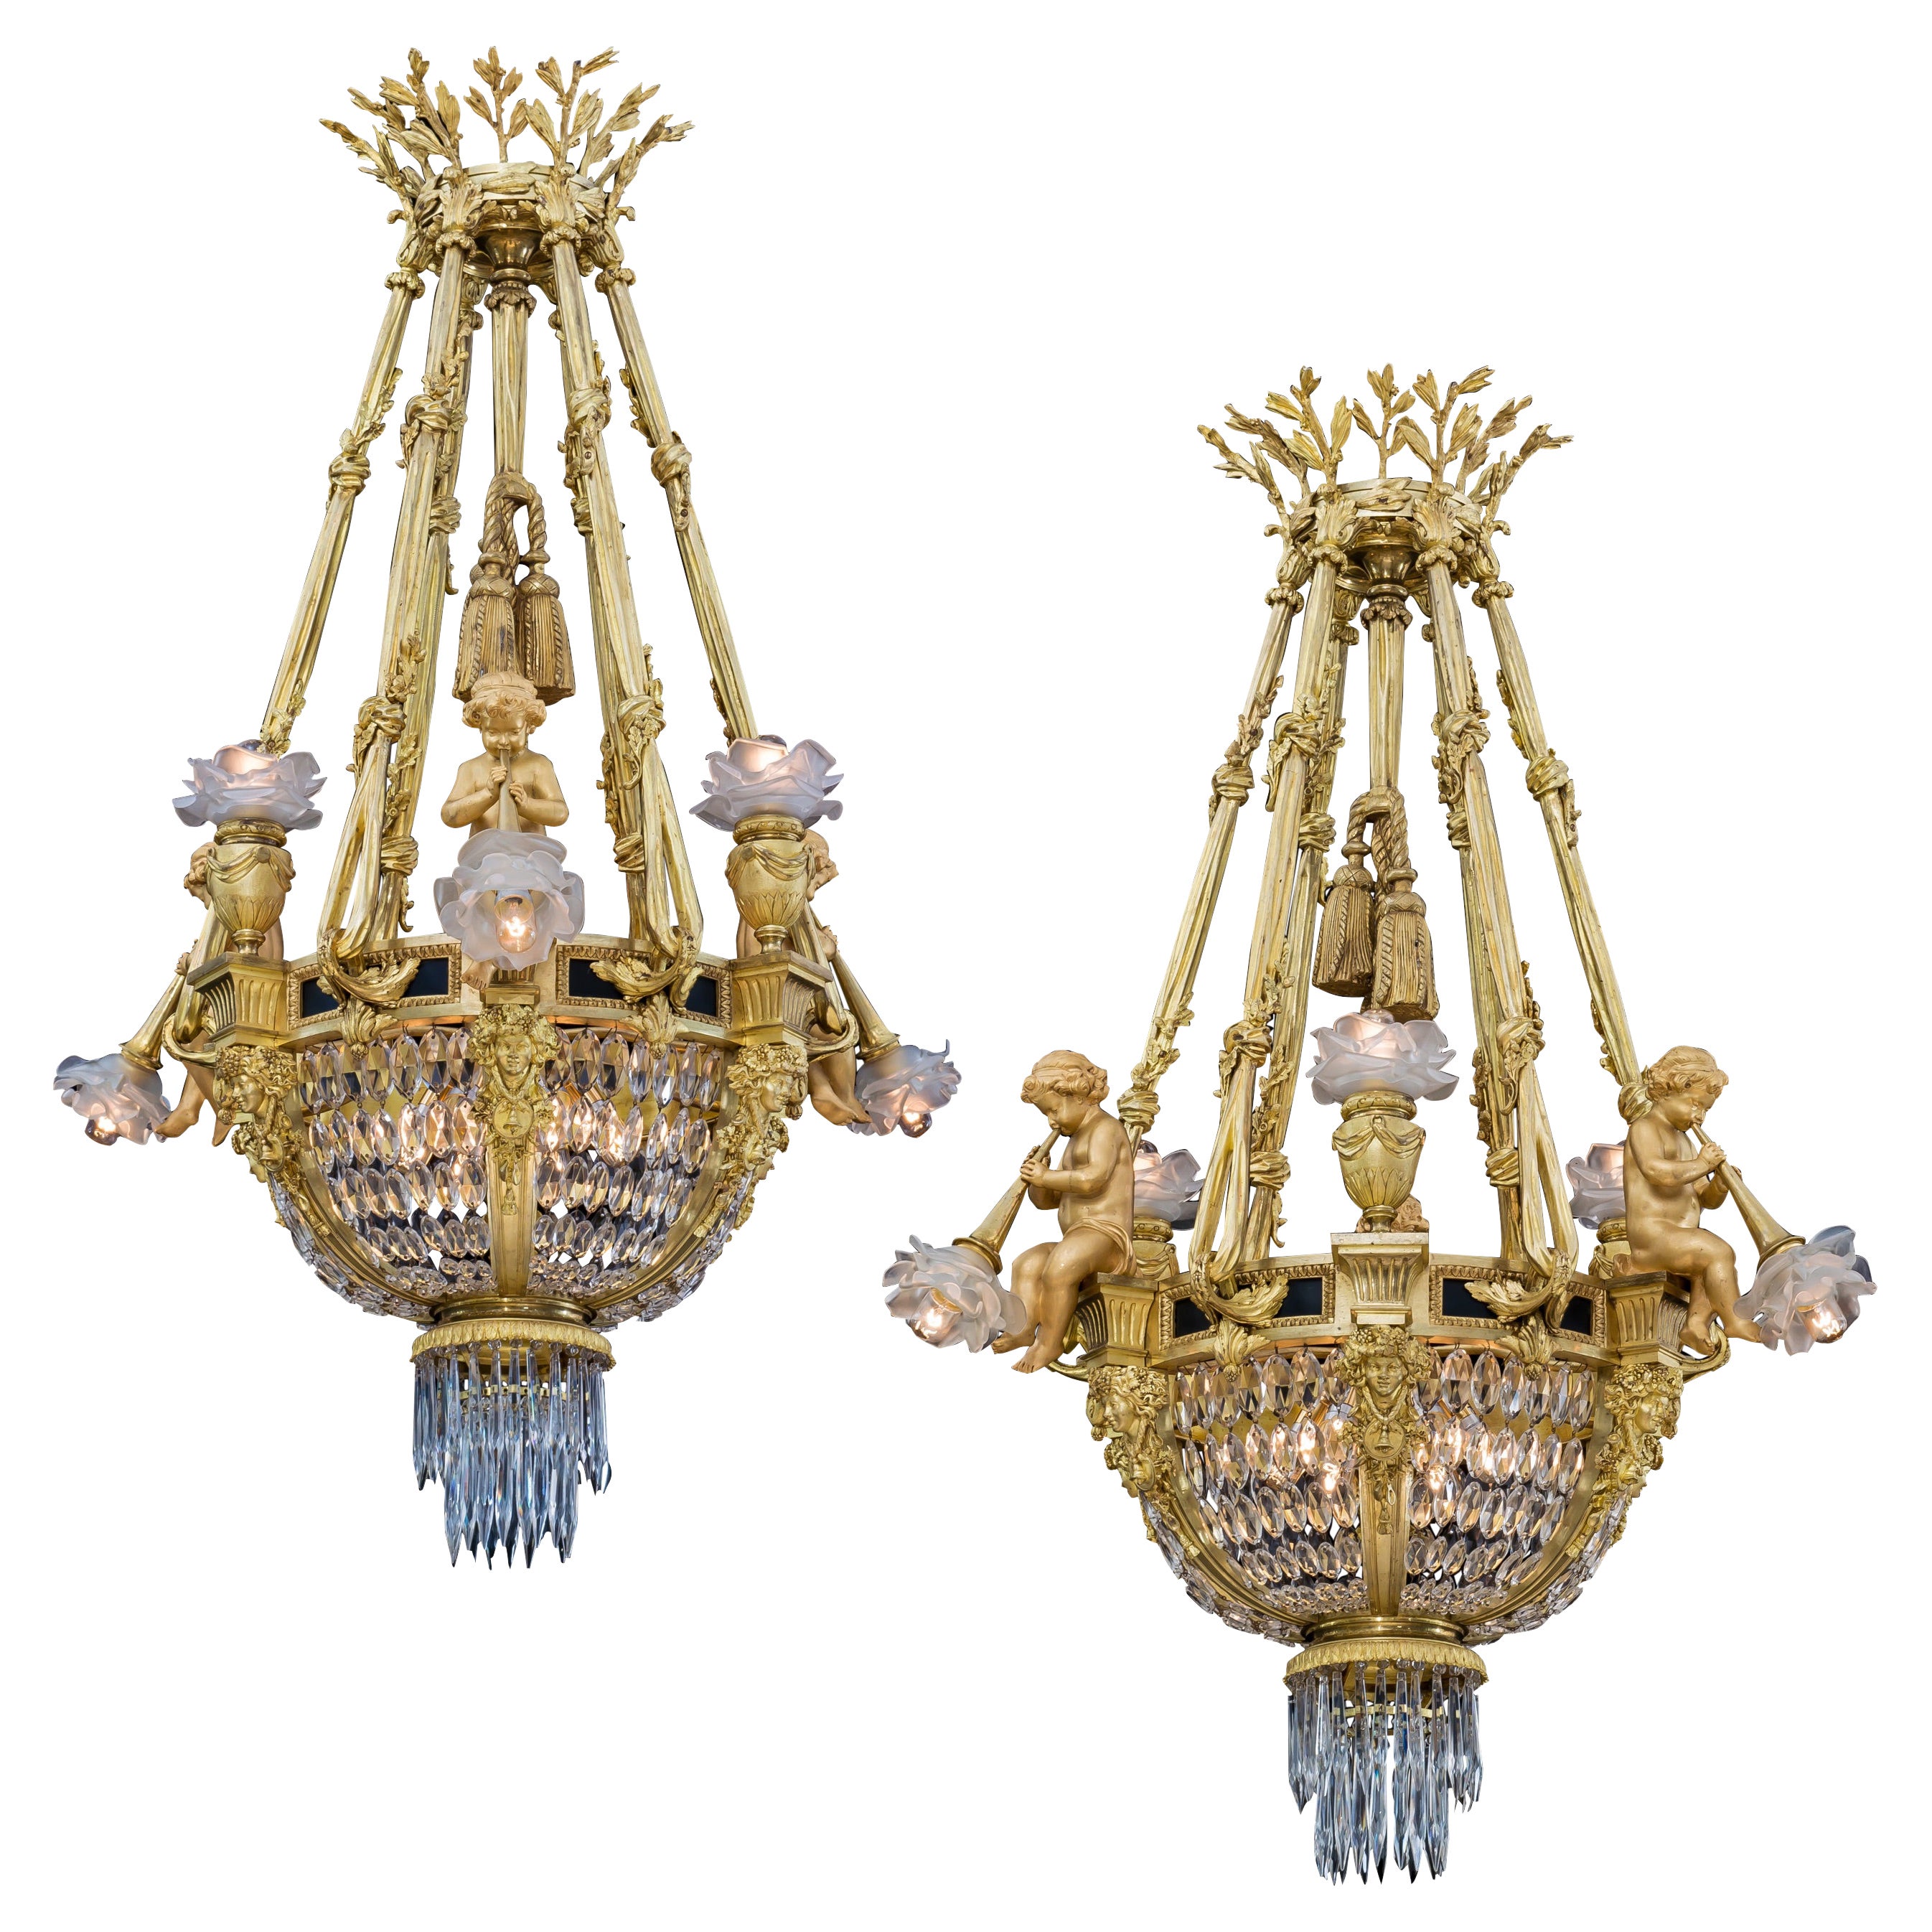 Extremely Rare Pair of Ormolu and Crystal Chandeliers in the Louis XVI Style For Sale